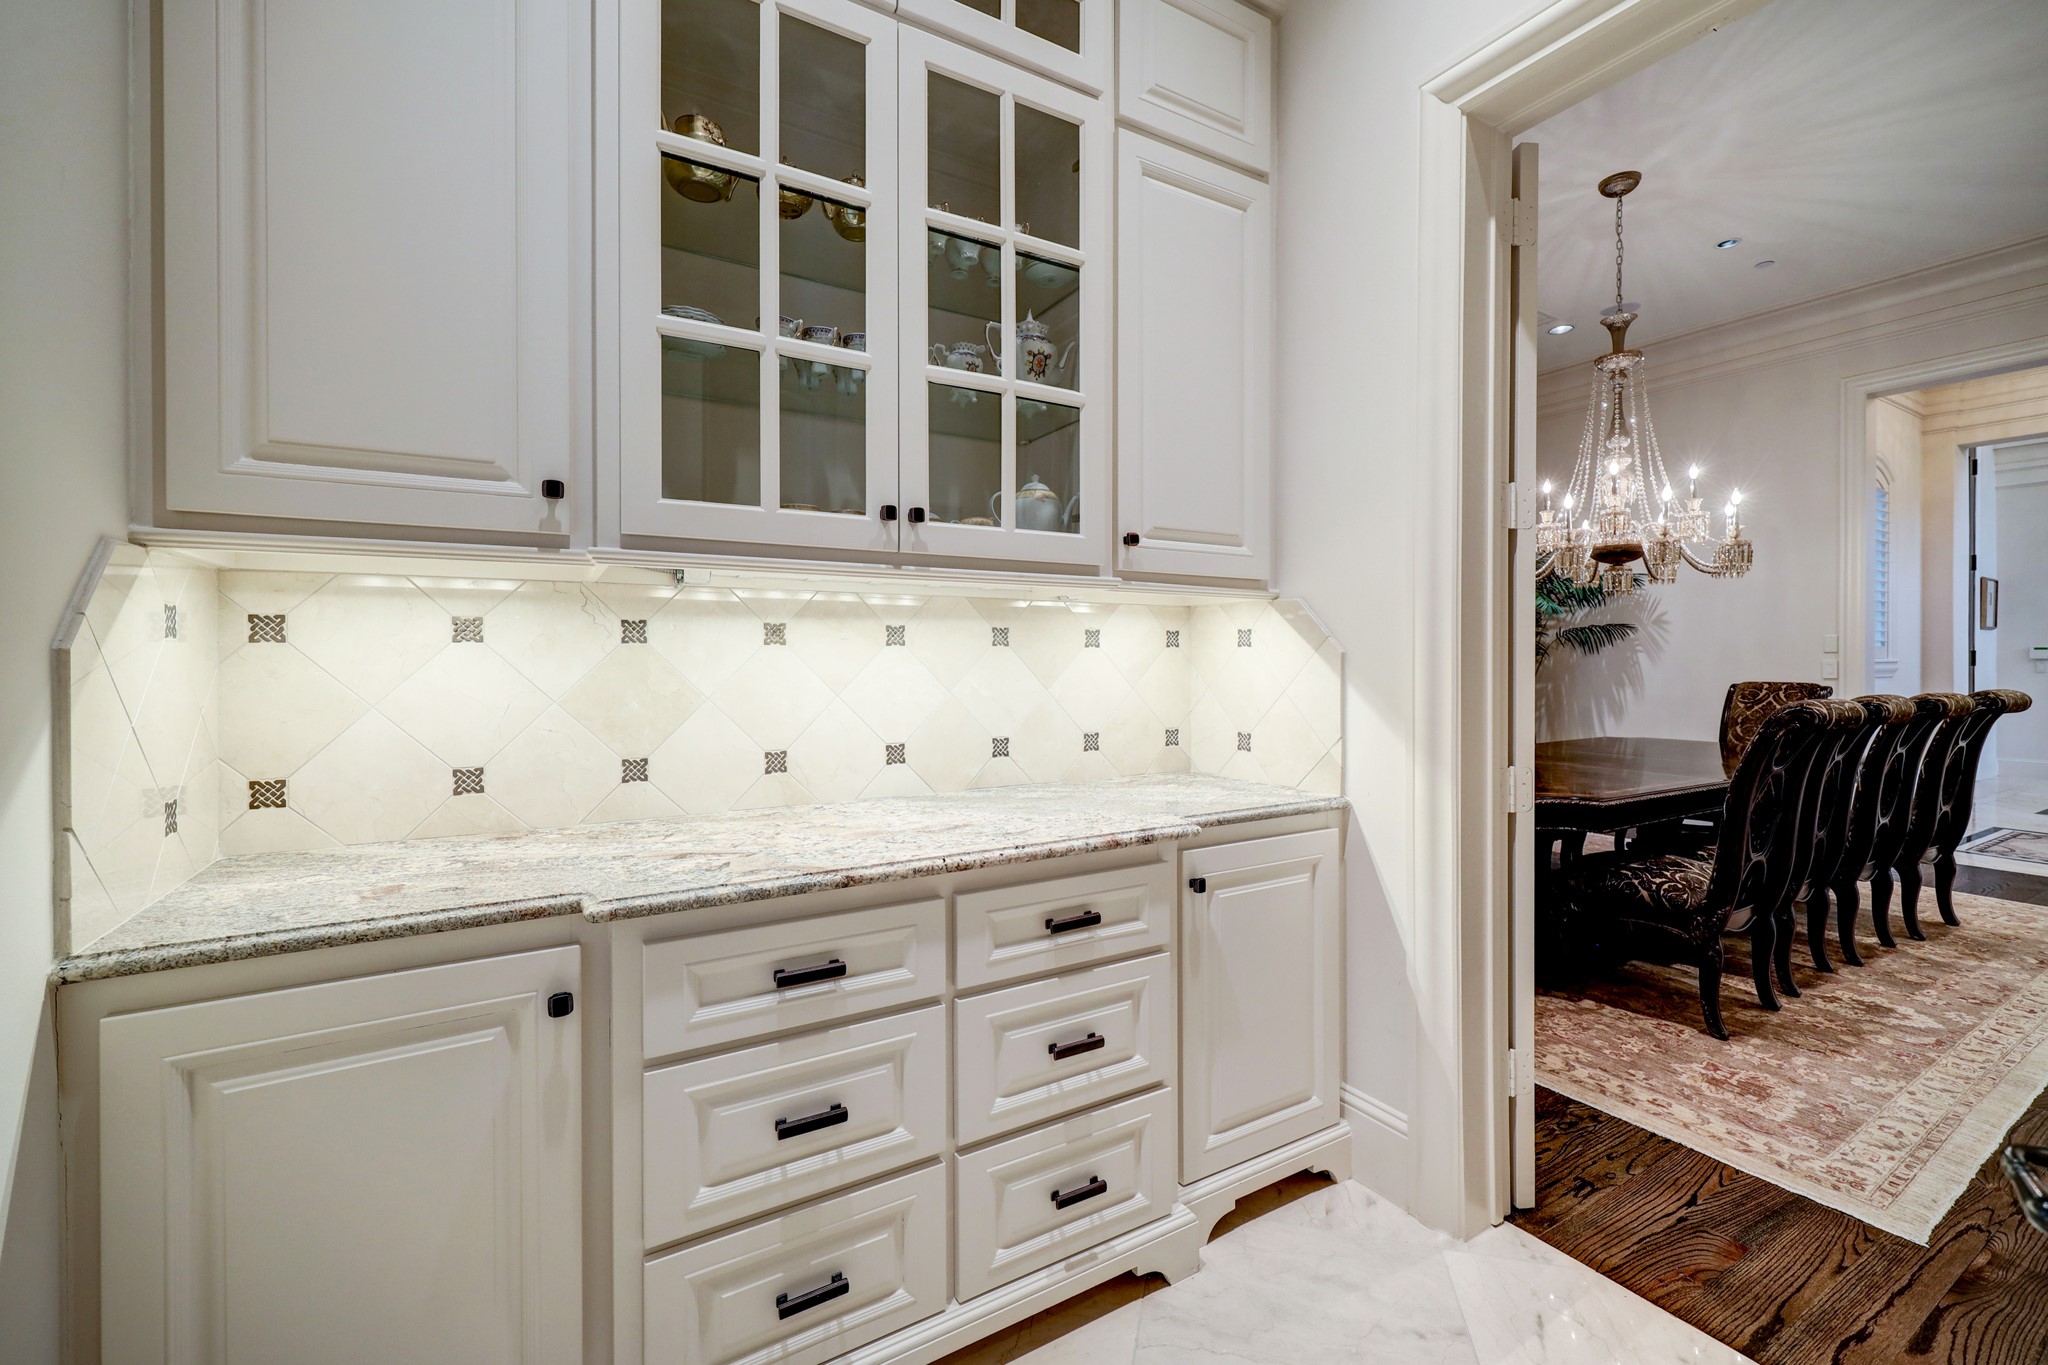 The Butler's Pantry is located between the Formal Dining Room and Kitchen and offers a granite countertop with tile backsplash, overhead and undercounter cabinets/drawers offering great prep and storage space